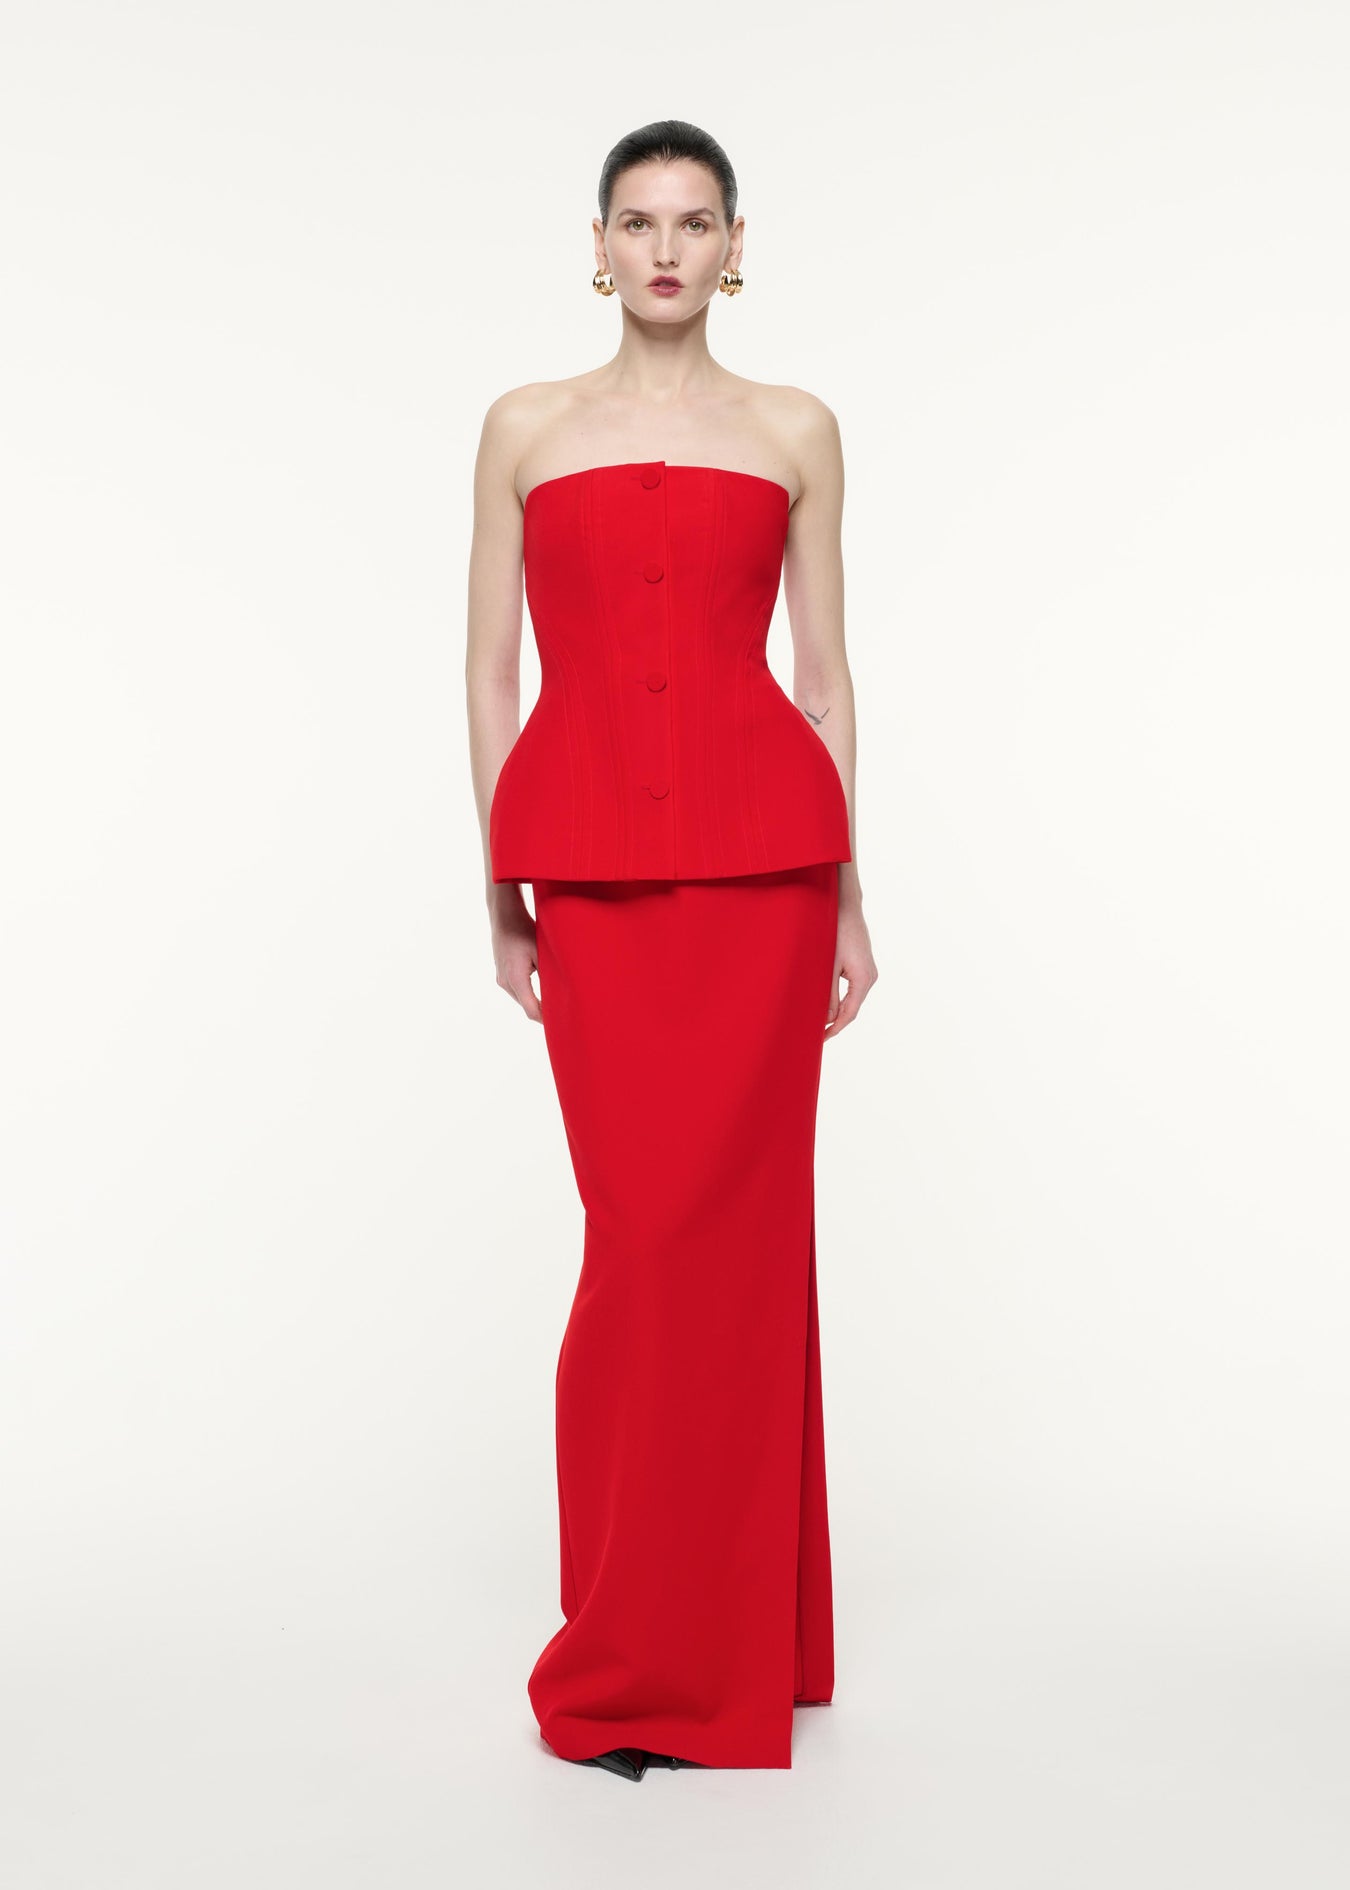 A front view image of a model wearing the Strapless Crepe Gown in Red